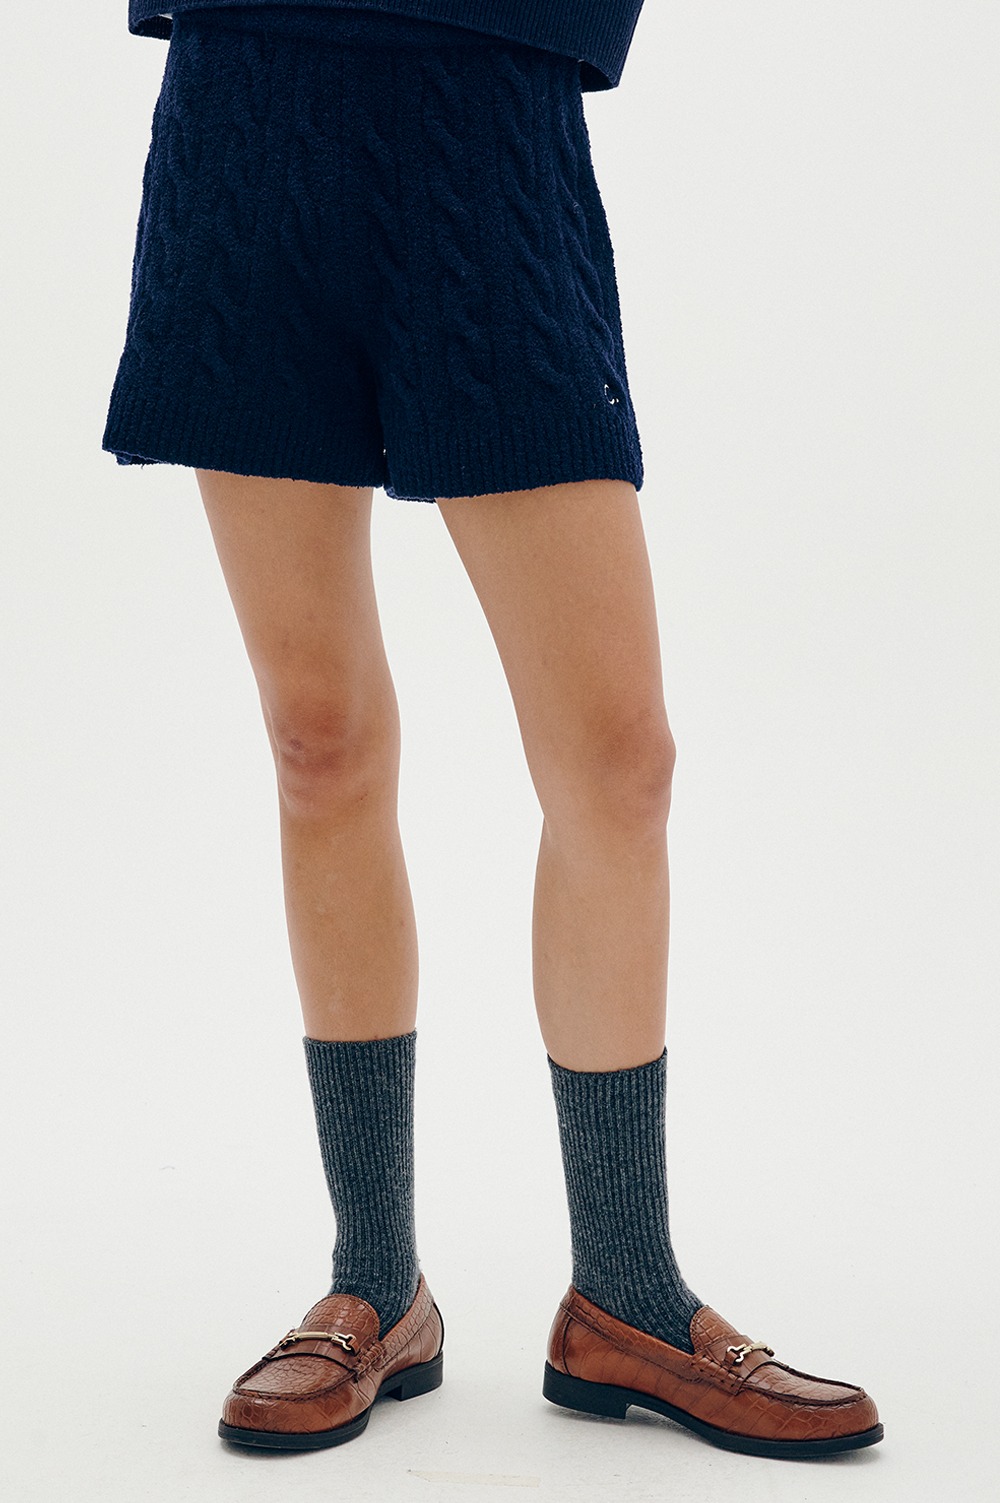 clove - [22FW clove] Cable Knit Shorts (Navy)